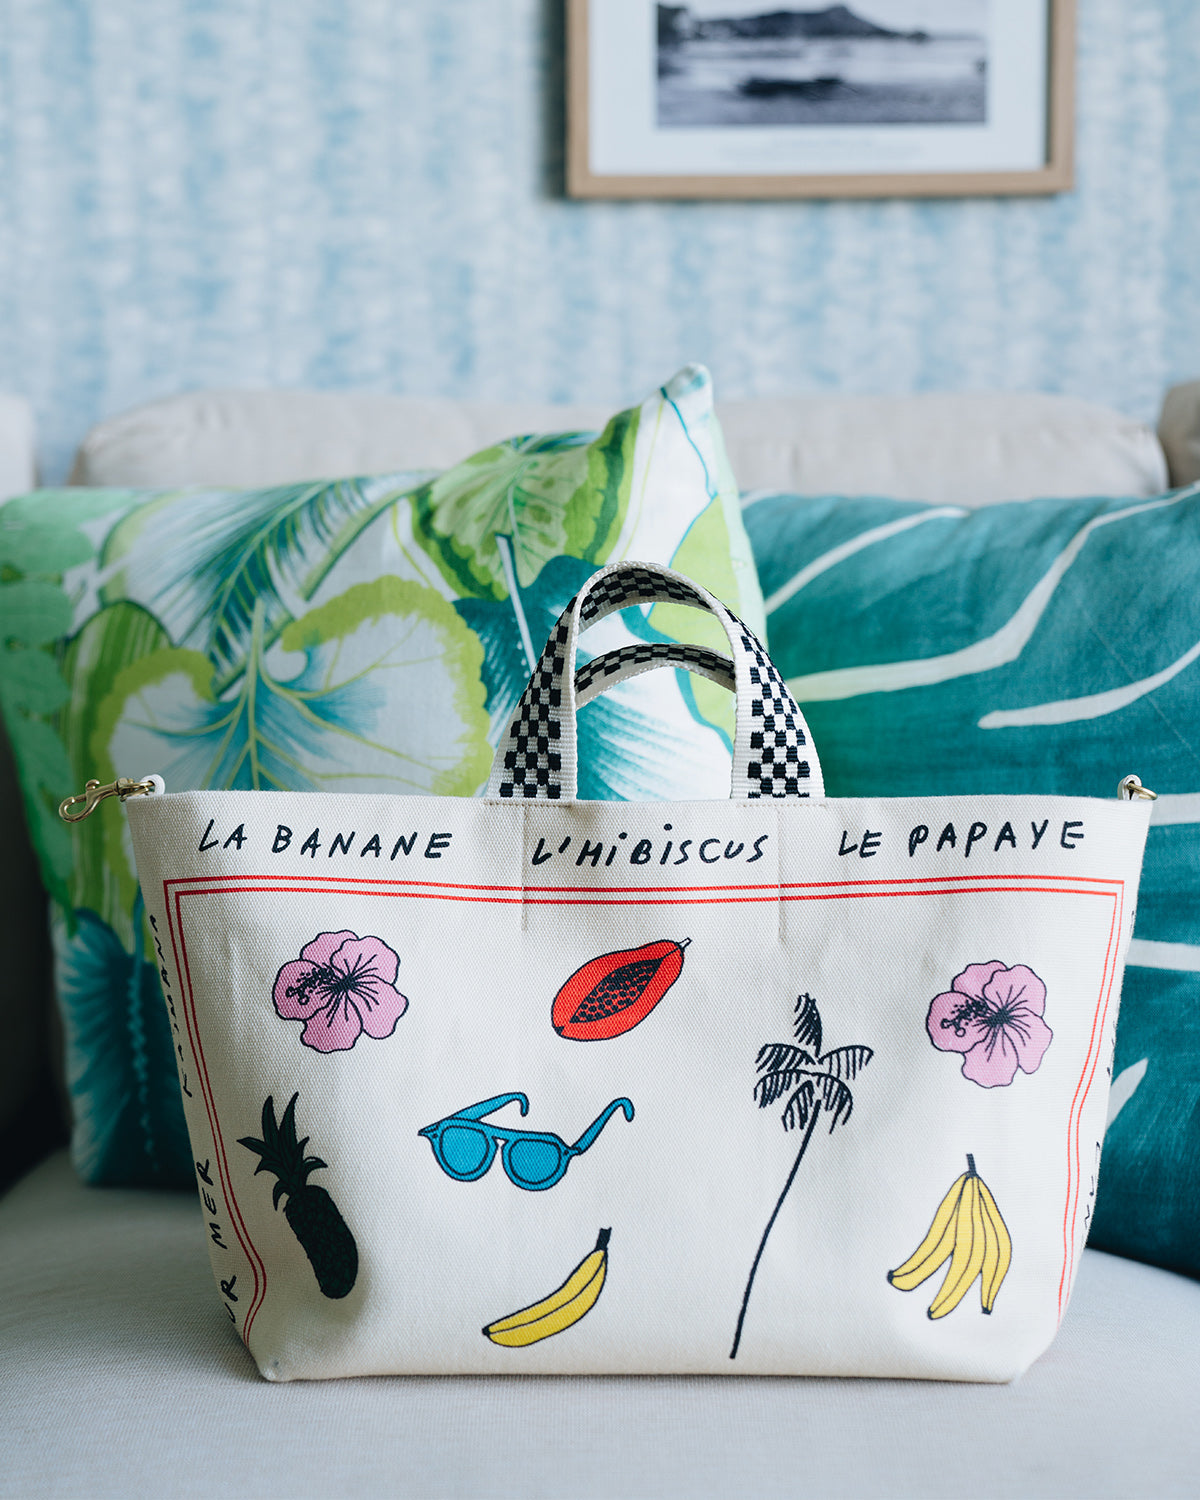 CV x Le Catch Bateau Tote in Natural Paradis Print Sitting on a White Table in Front of Throw Pillows